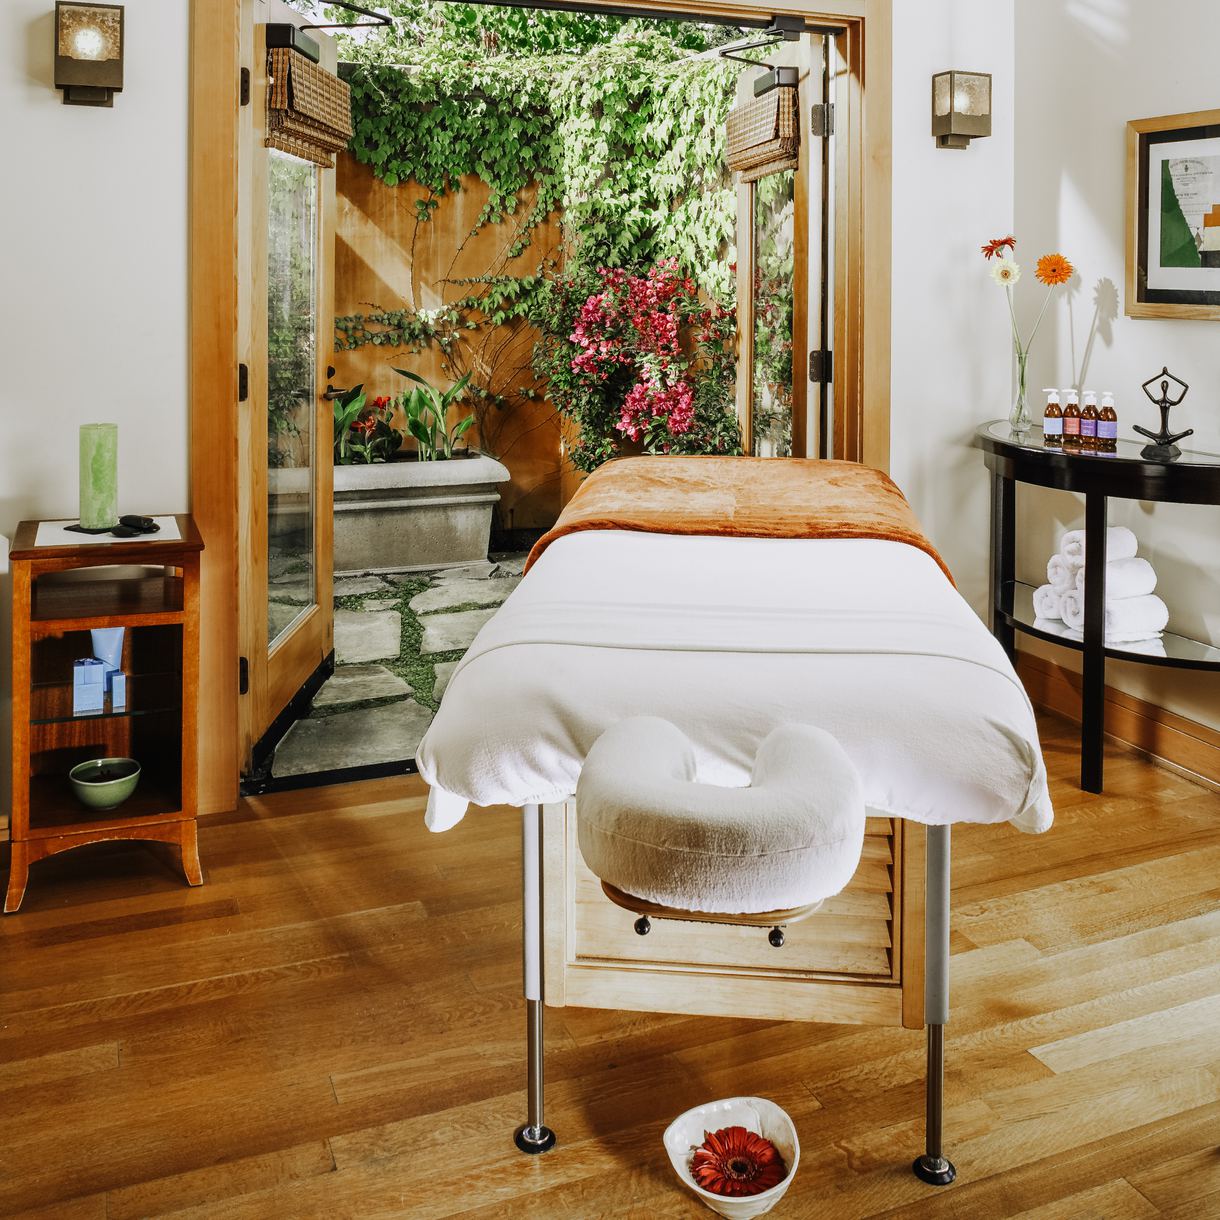 Get pampered with an aromatherapy massage.